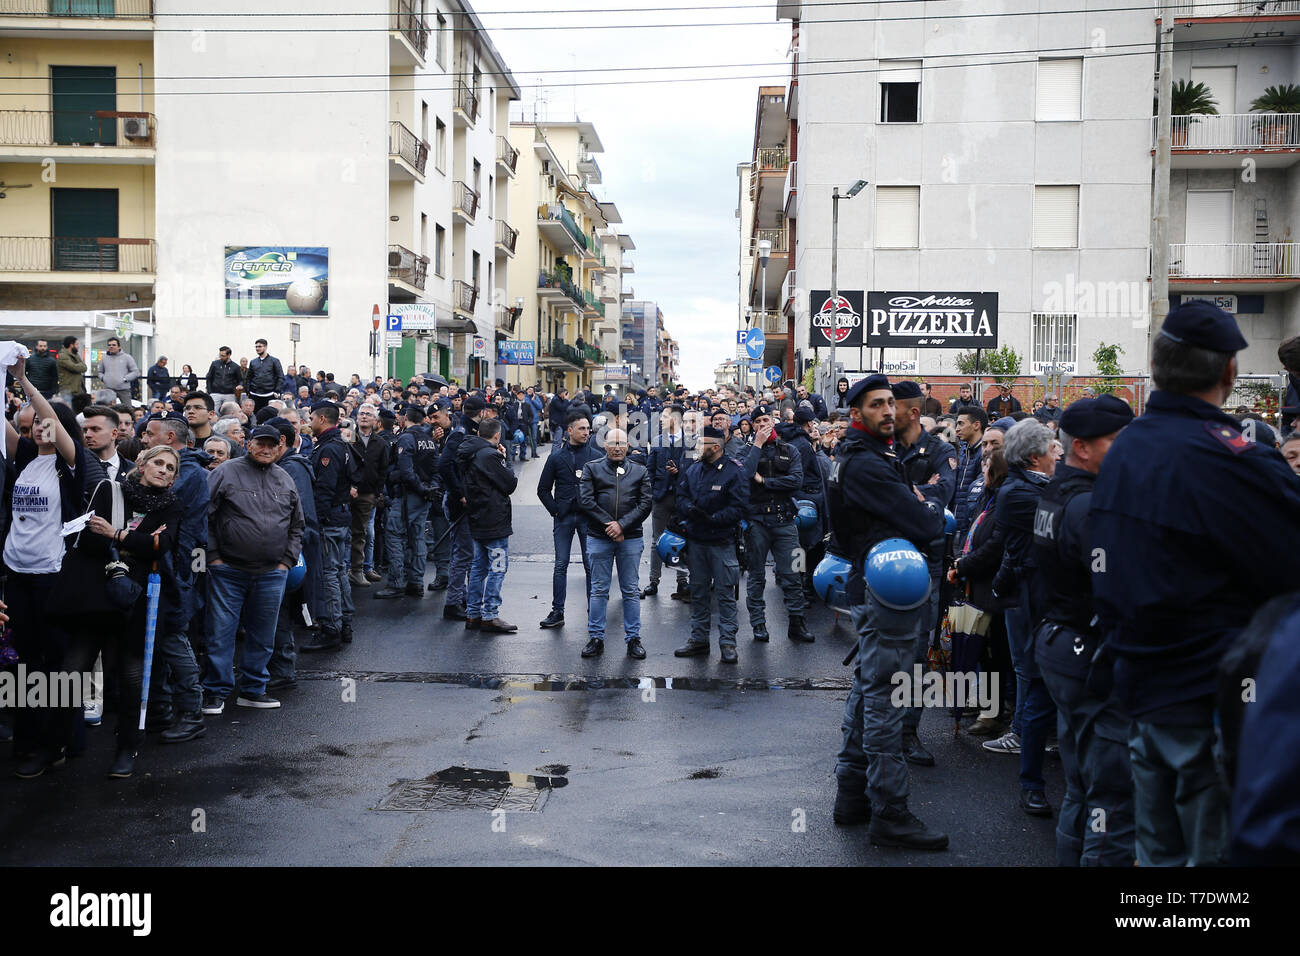 Aversa, ITALY. 6th May, 2019. A group of protesters from the social centers are waiting outside where Matteo Salvini's rally took place to protest.Deputy Premier Matteo Salvini in Aversa for a political rally for the May European elections.Aversa (ce) Metropolitan Cinema 6 May 2019 Credit: Fabio Sasso/ZUMA Wire/Alamy Live News Stock Photo